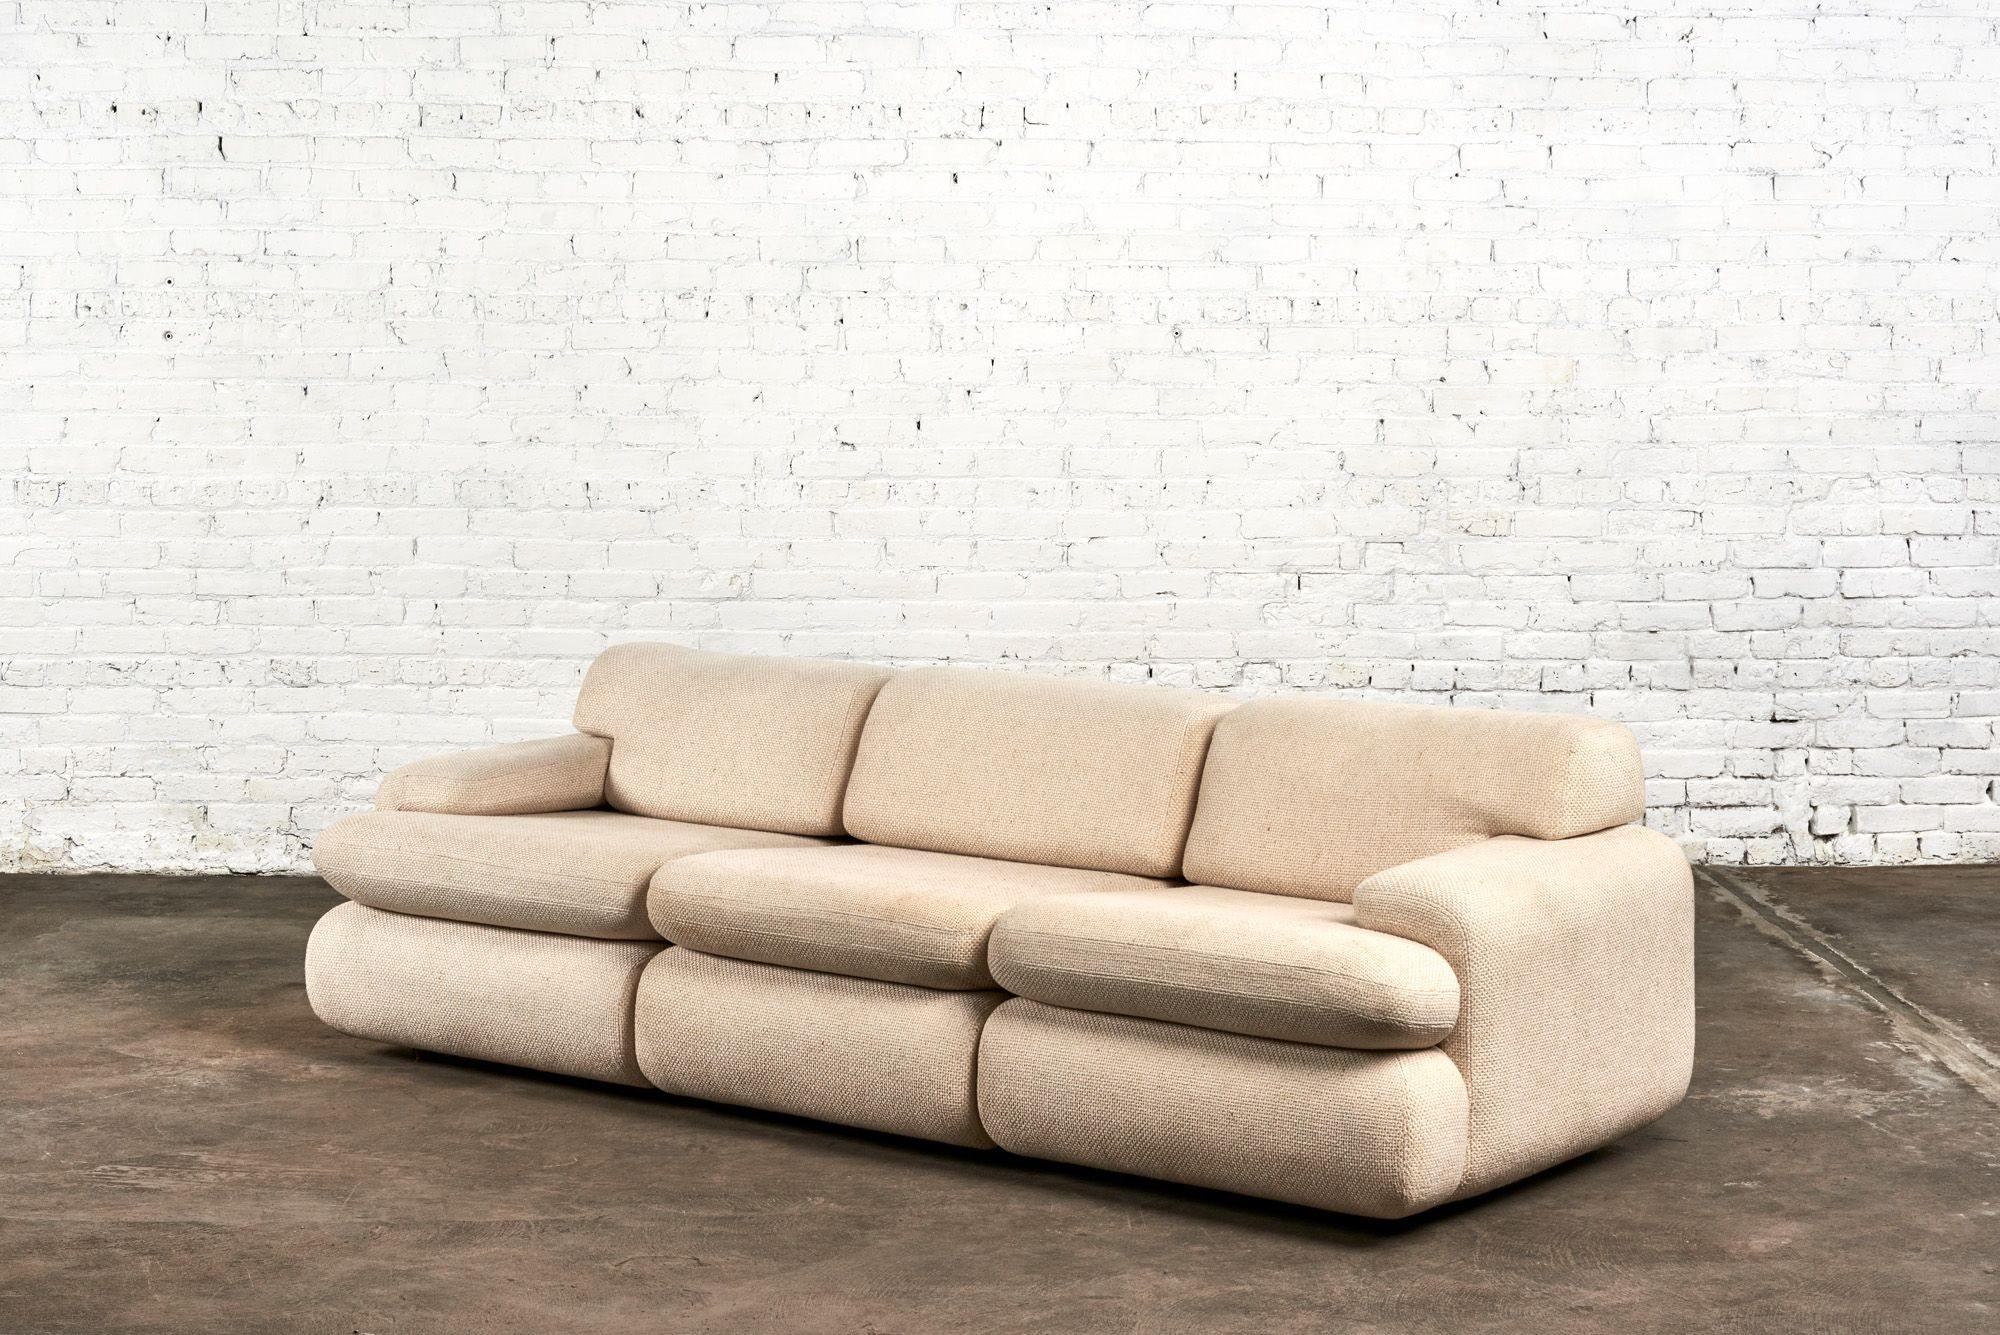 Post-Modern Vladimir Kagan for Preview 3 Piece Sectional Sofa, 1987 For Sale